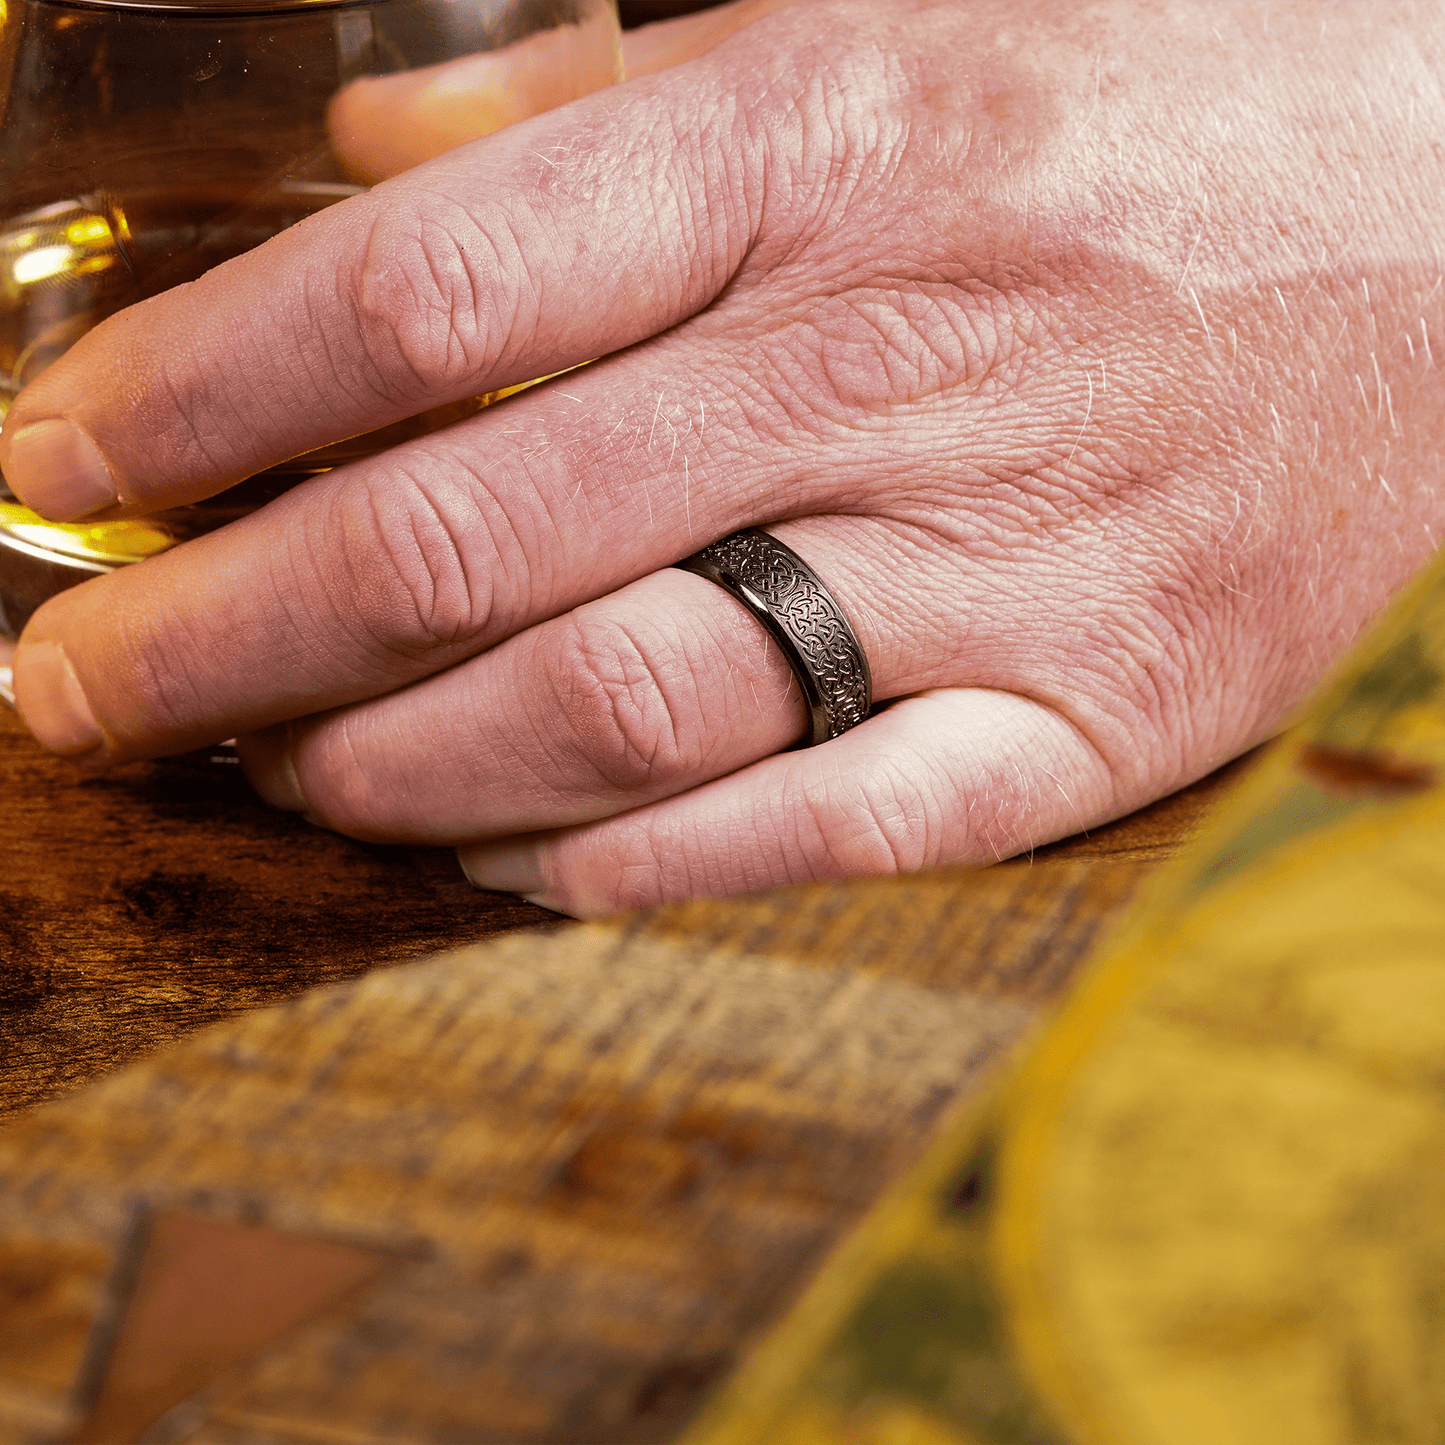 The Doire - Men's Wedding Rings - Manly Bands